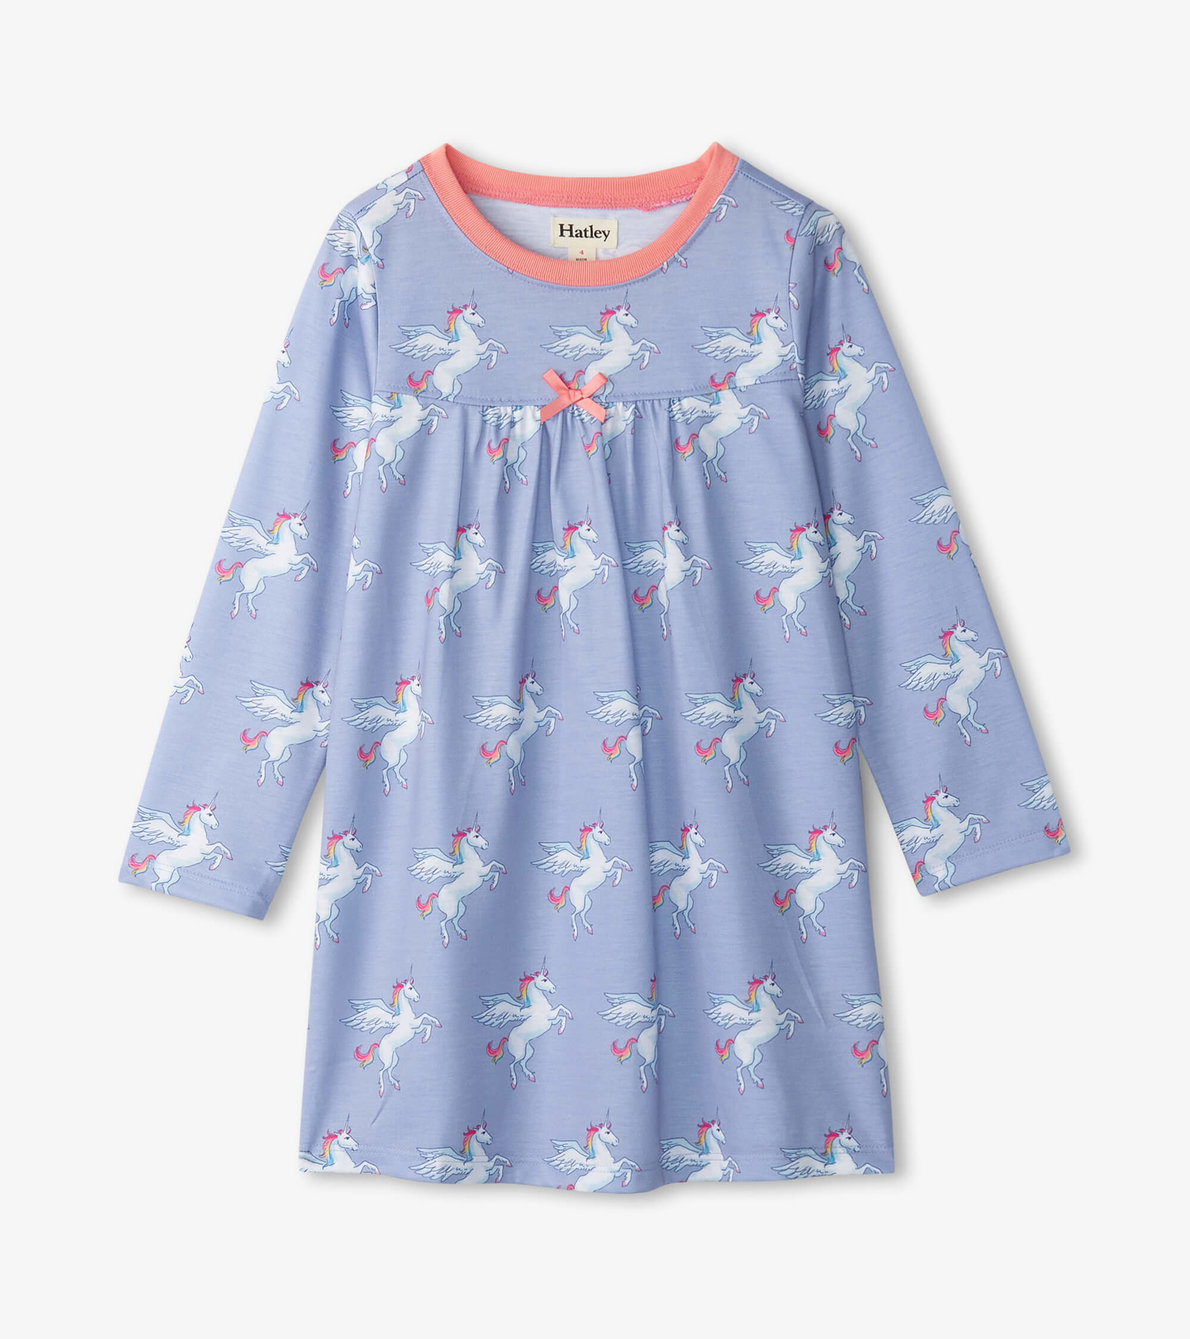 View larger image of Girls Rainbow Unicorn Long Sleeve Nightgown